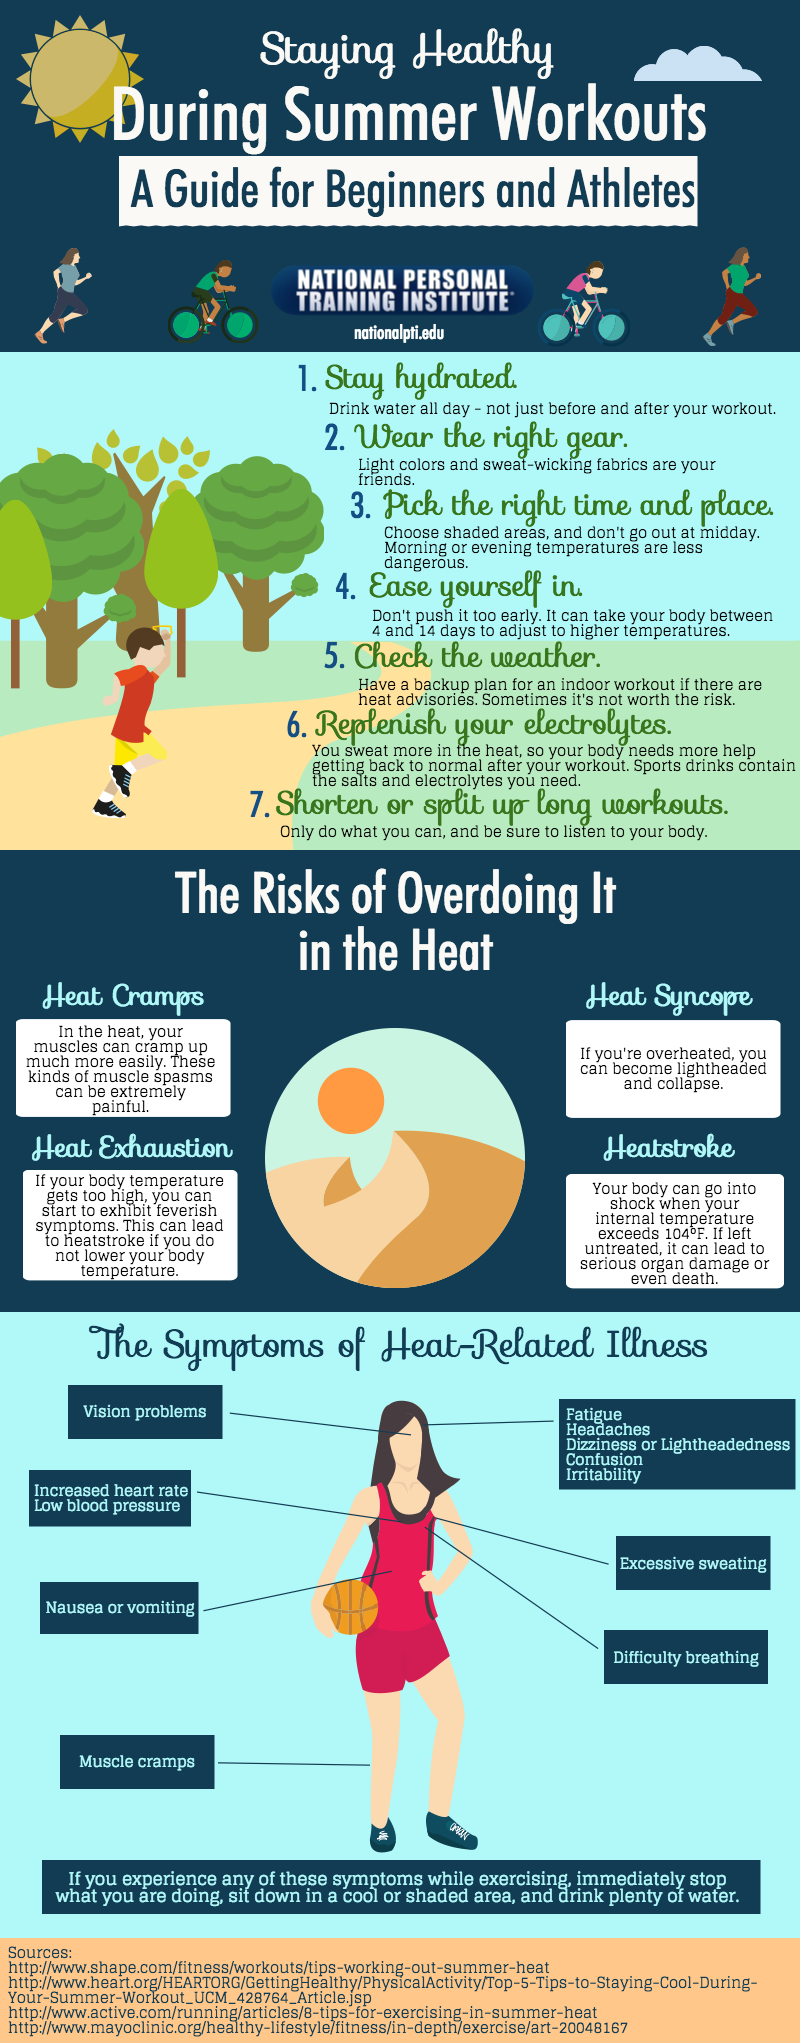 exercising in the heat of summertime - how to stay healthy and safe